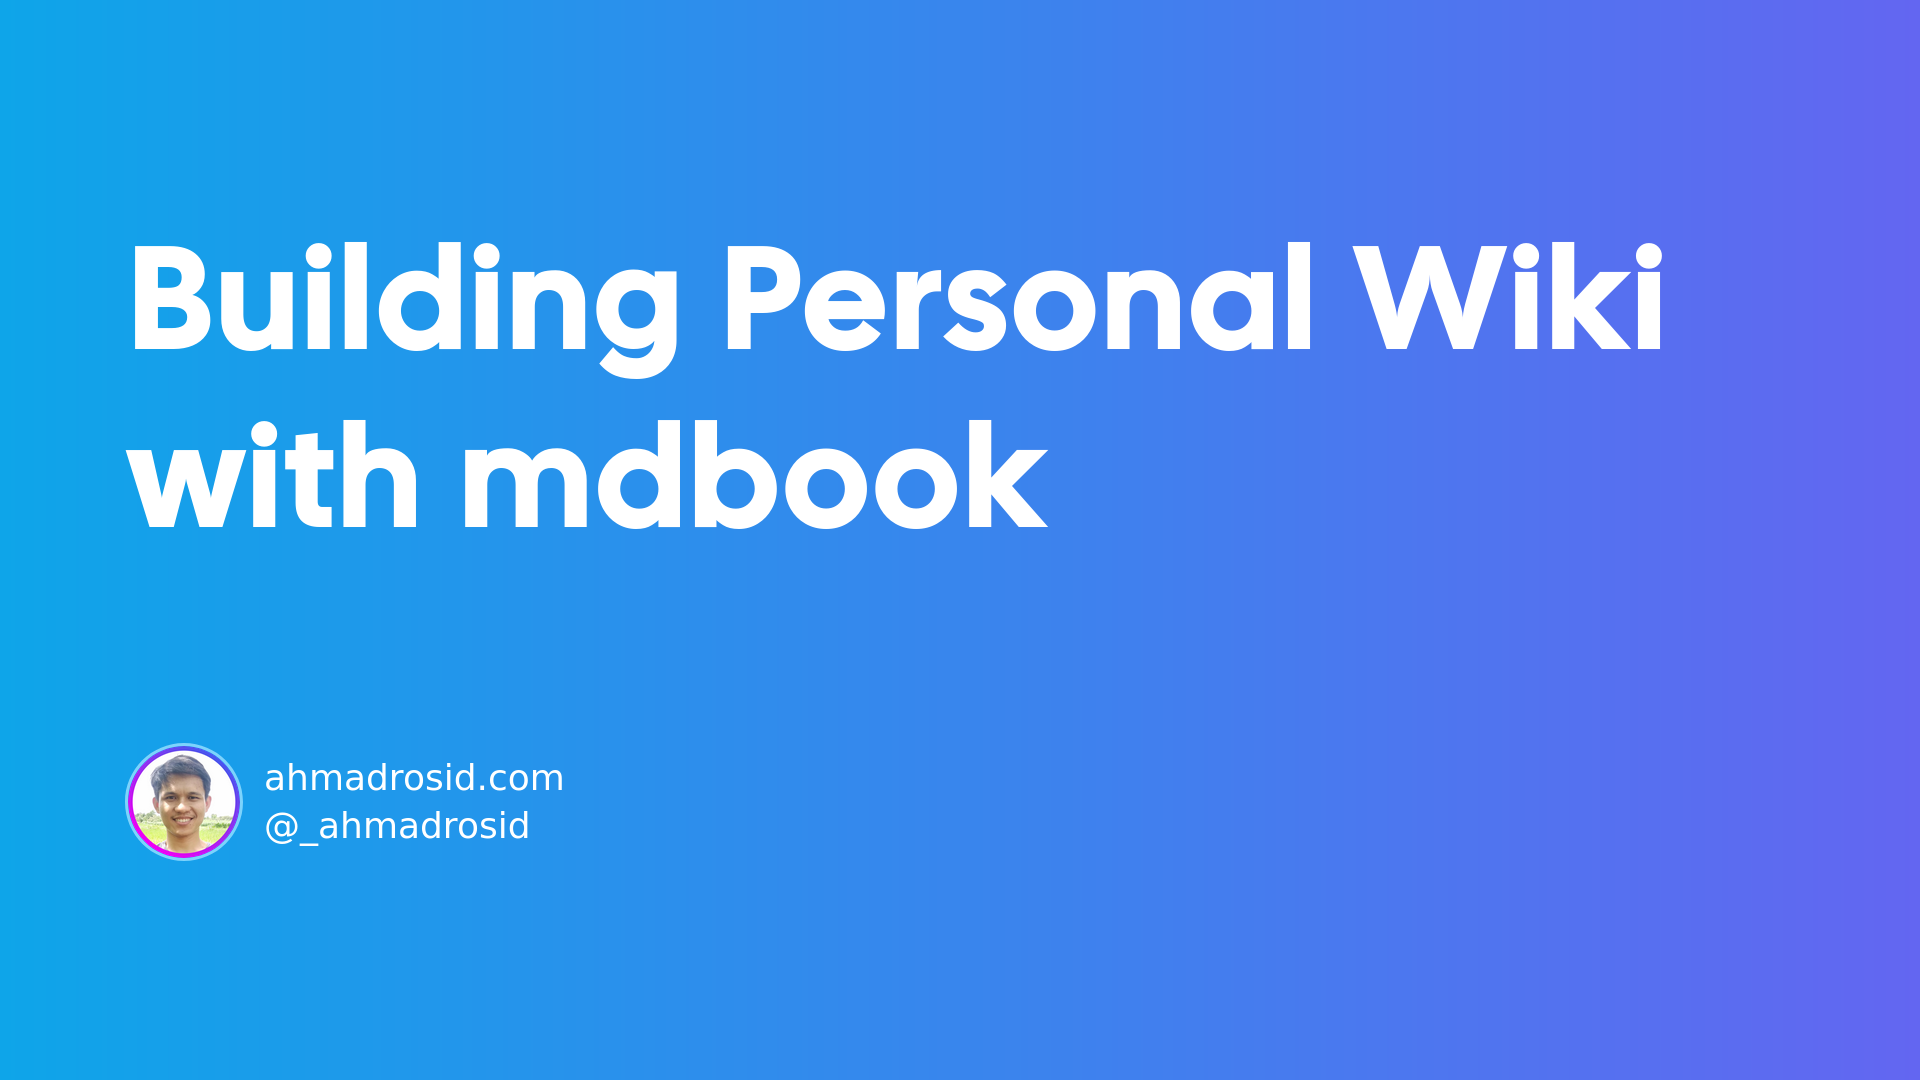 Building Personal Wiki on Next.js using mdbook